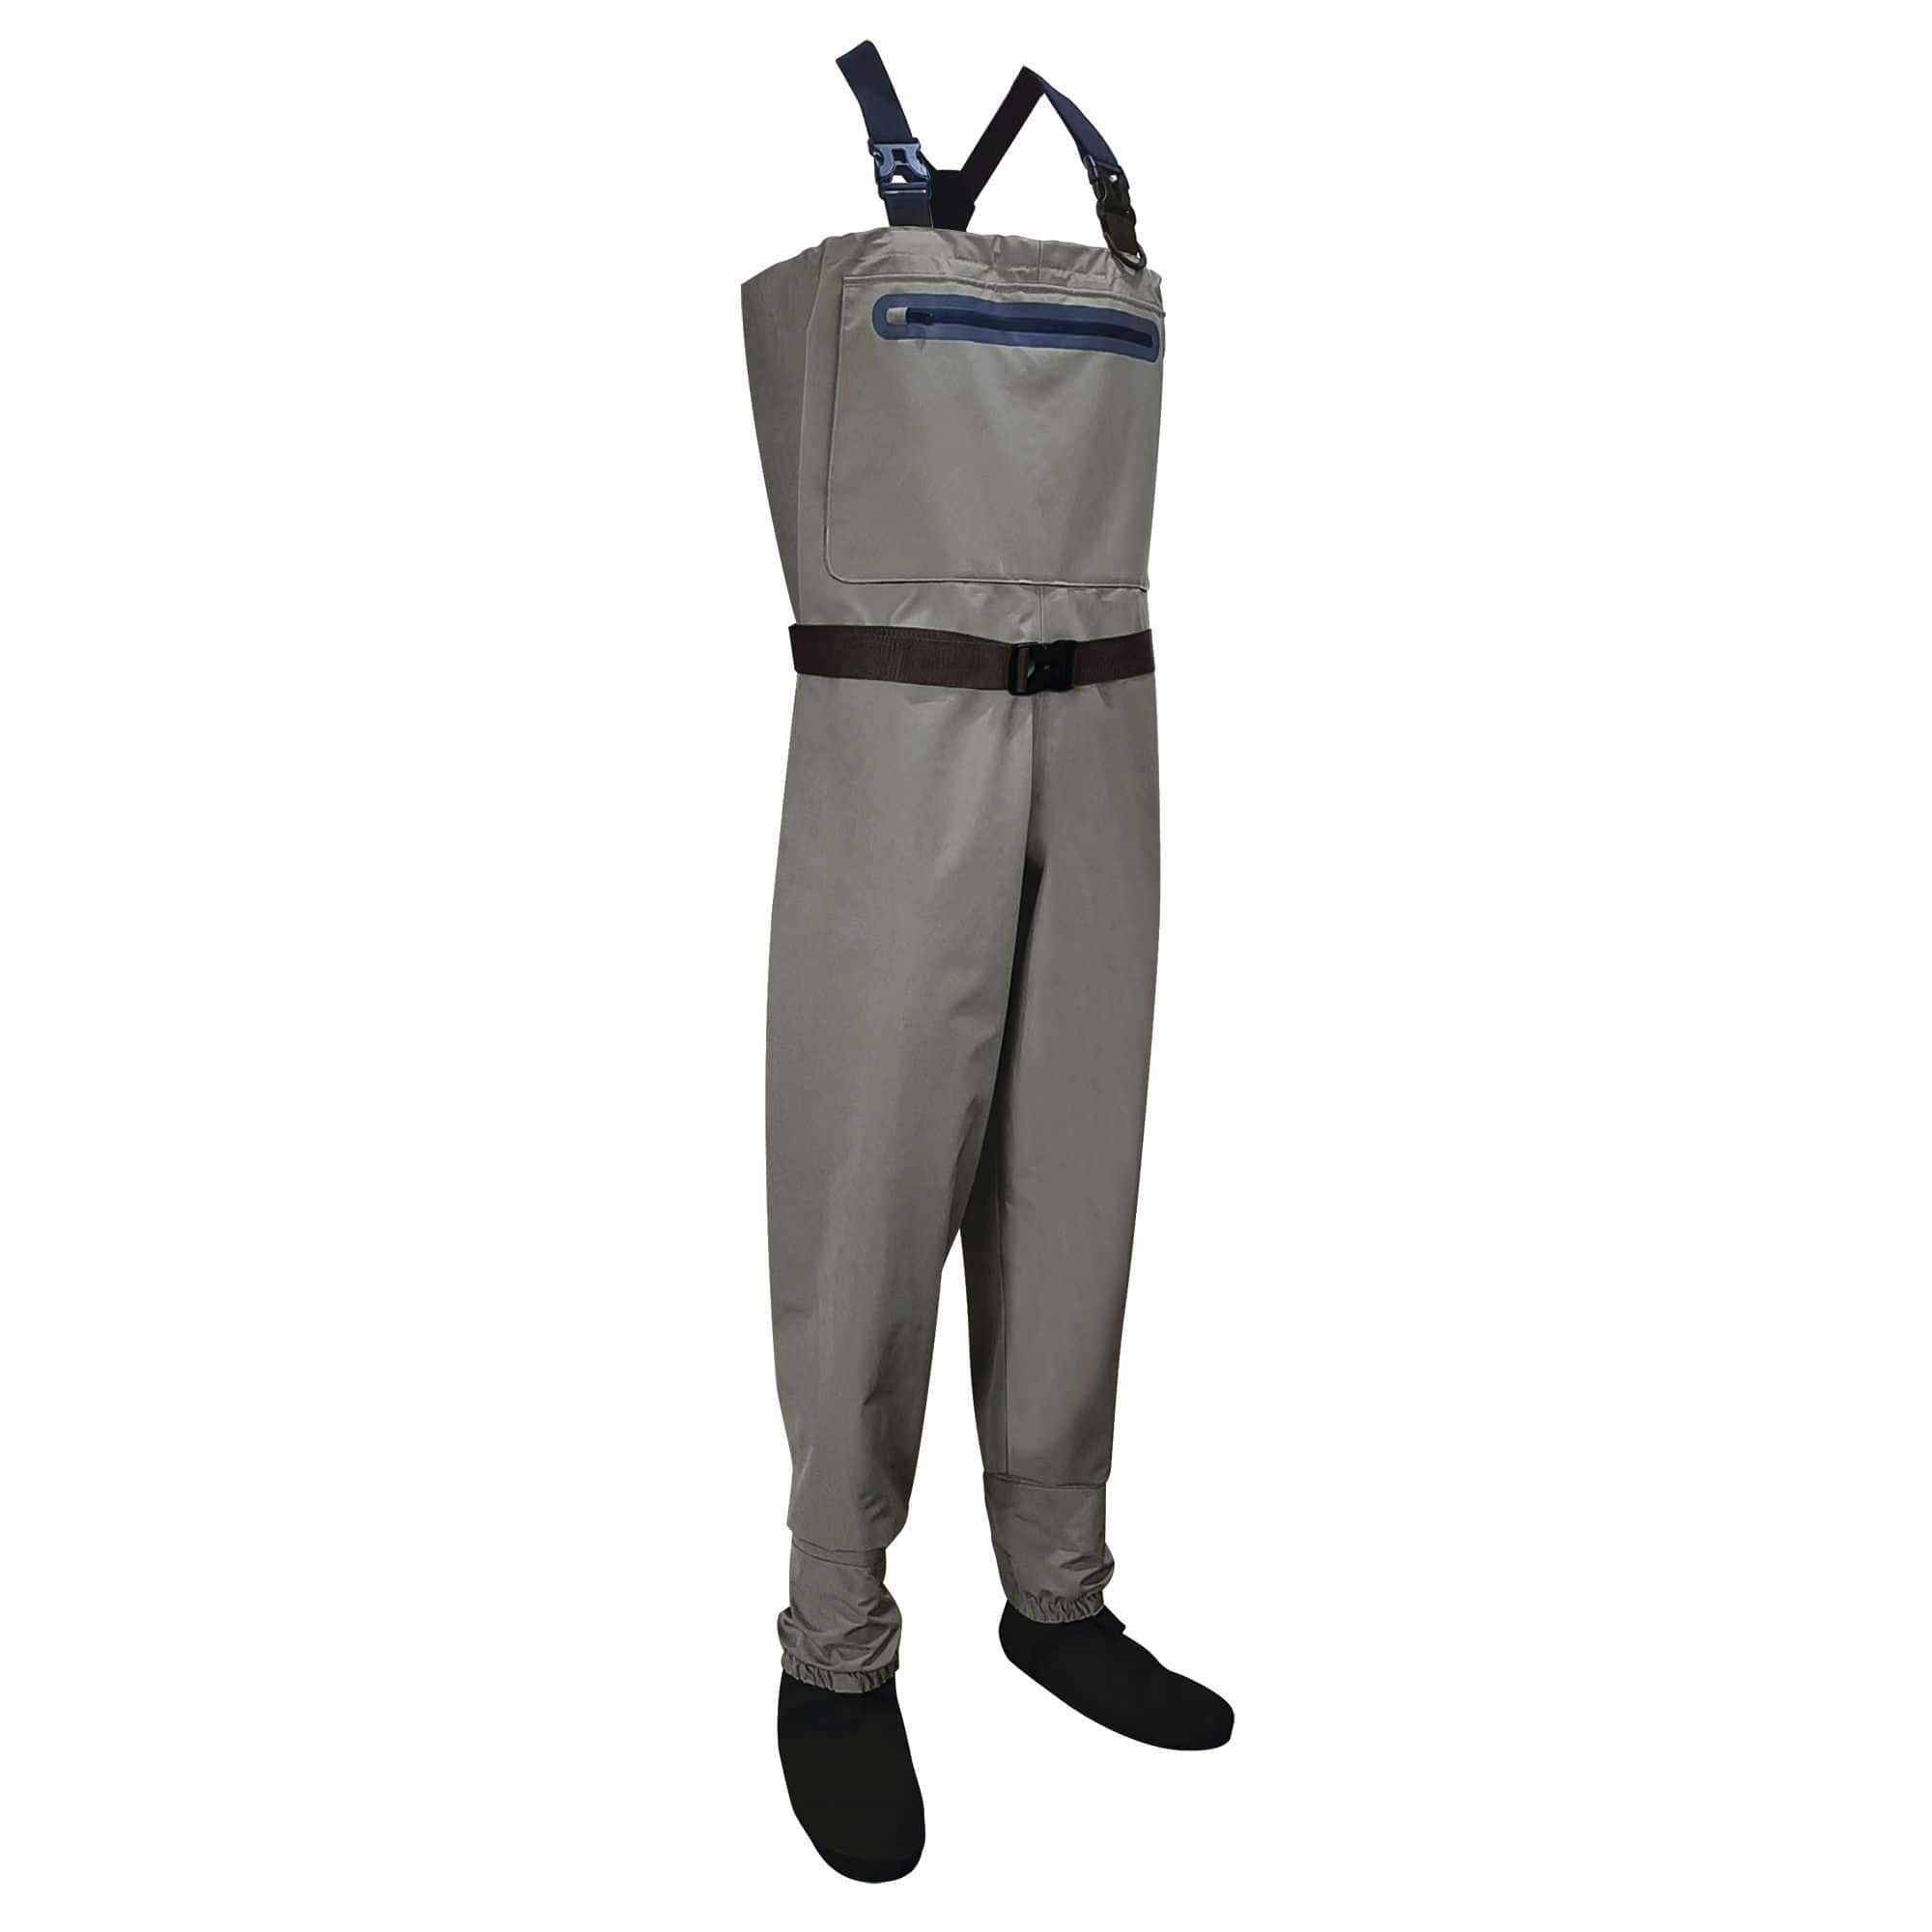 Wholesale fishing waders pants with rubber boots To Improve